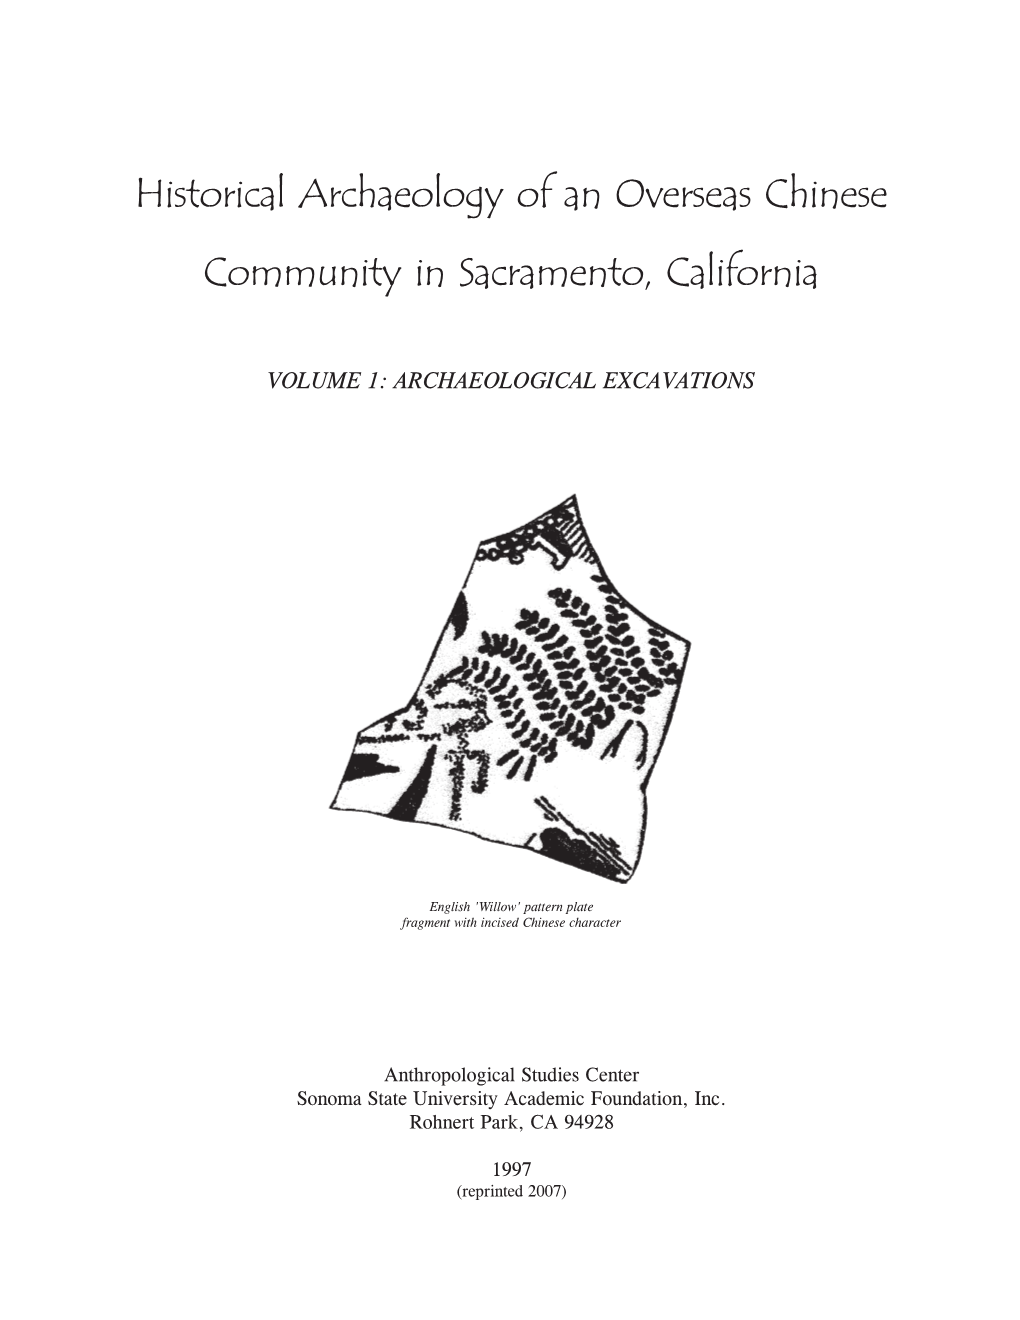 Historical Archaeology of an Overseas Chinese Community in Sacramento, California